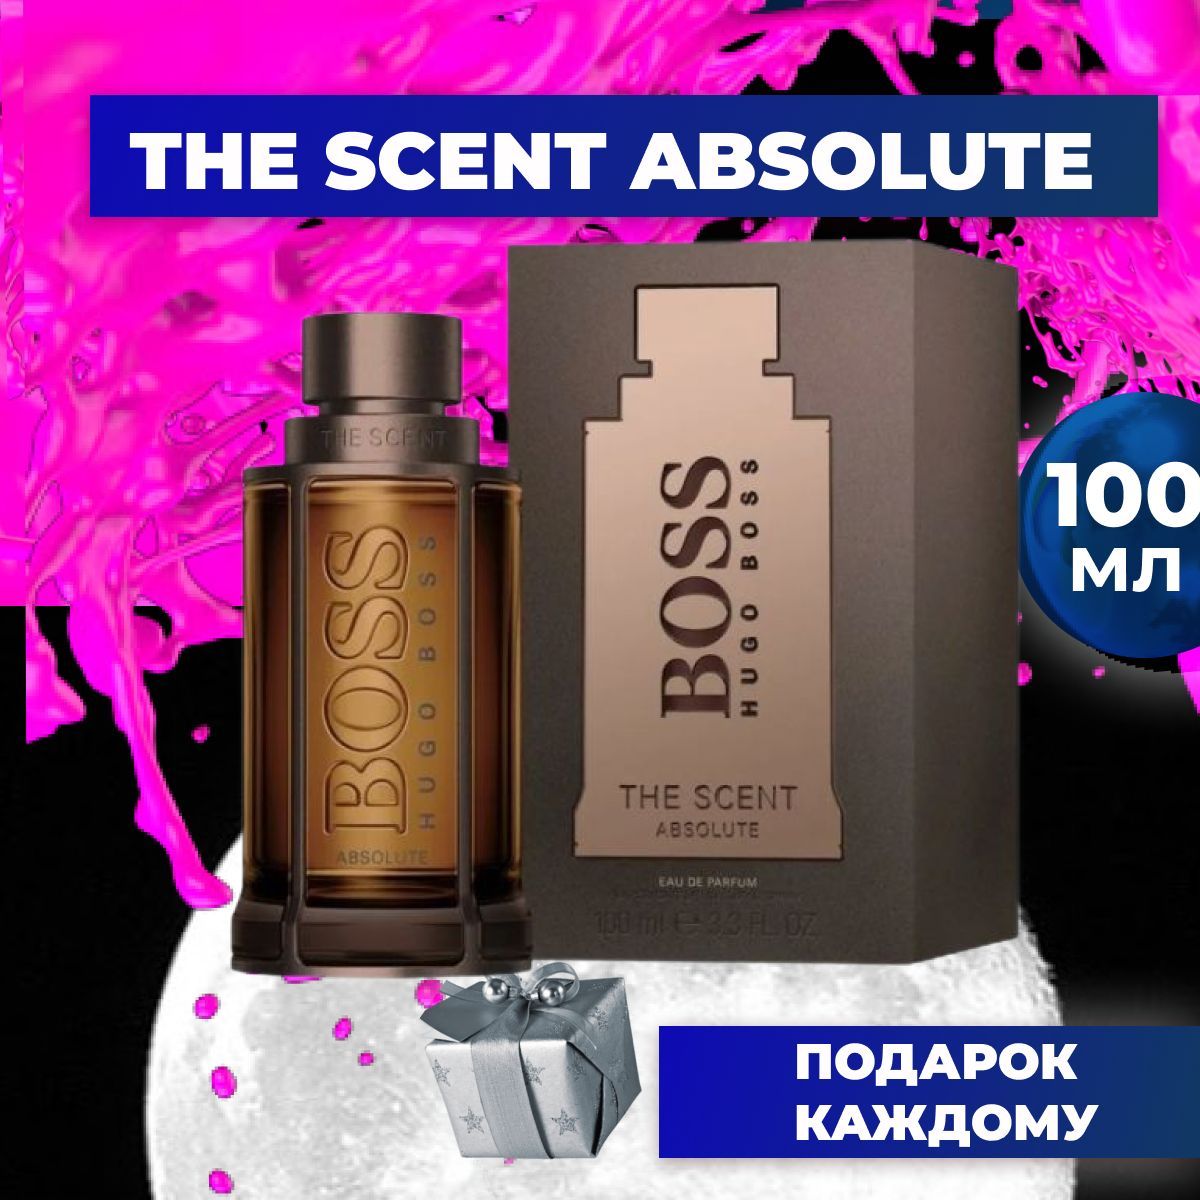 The Scent absolute. Boss the Scent absolute. Парфюмерная вода Hugo Boss the Scent absolute for her. Absolut 100h021. Height 100 absolute